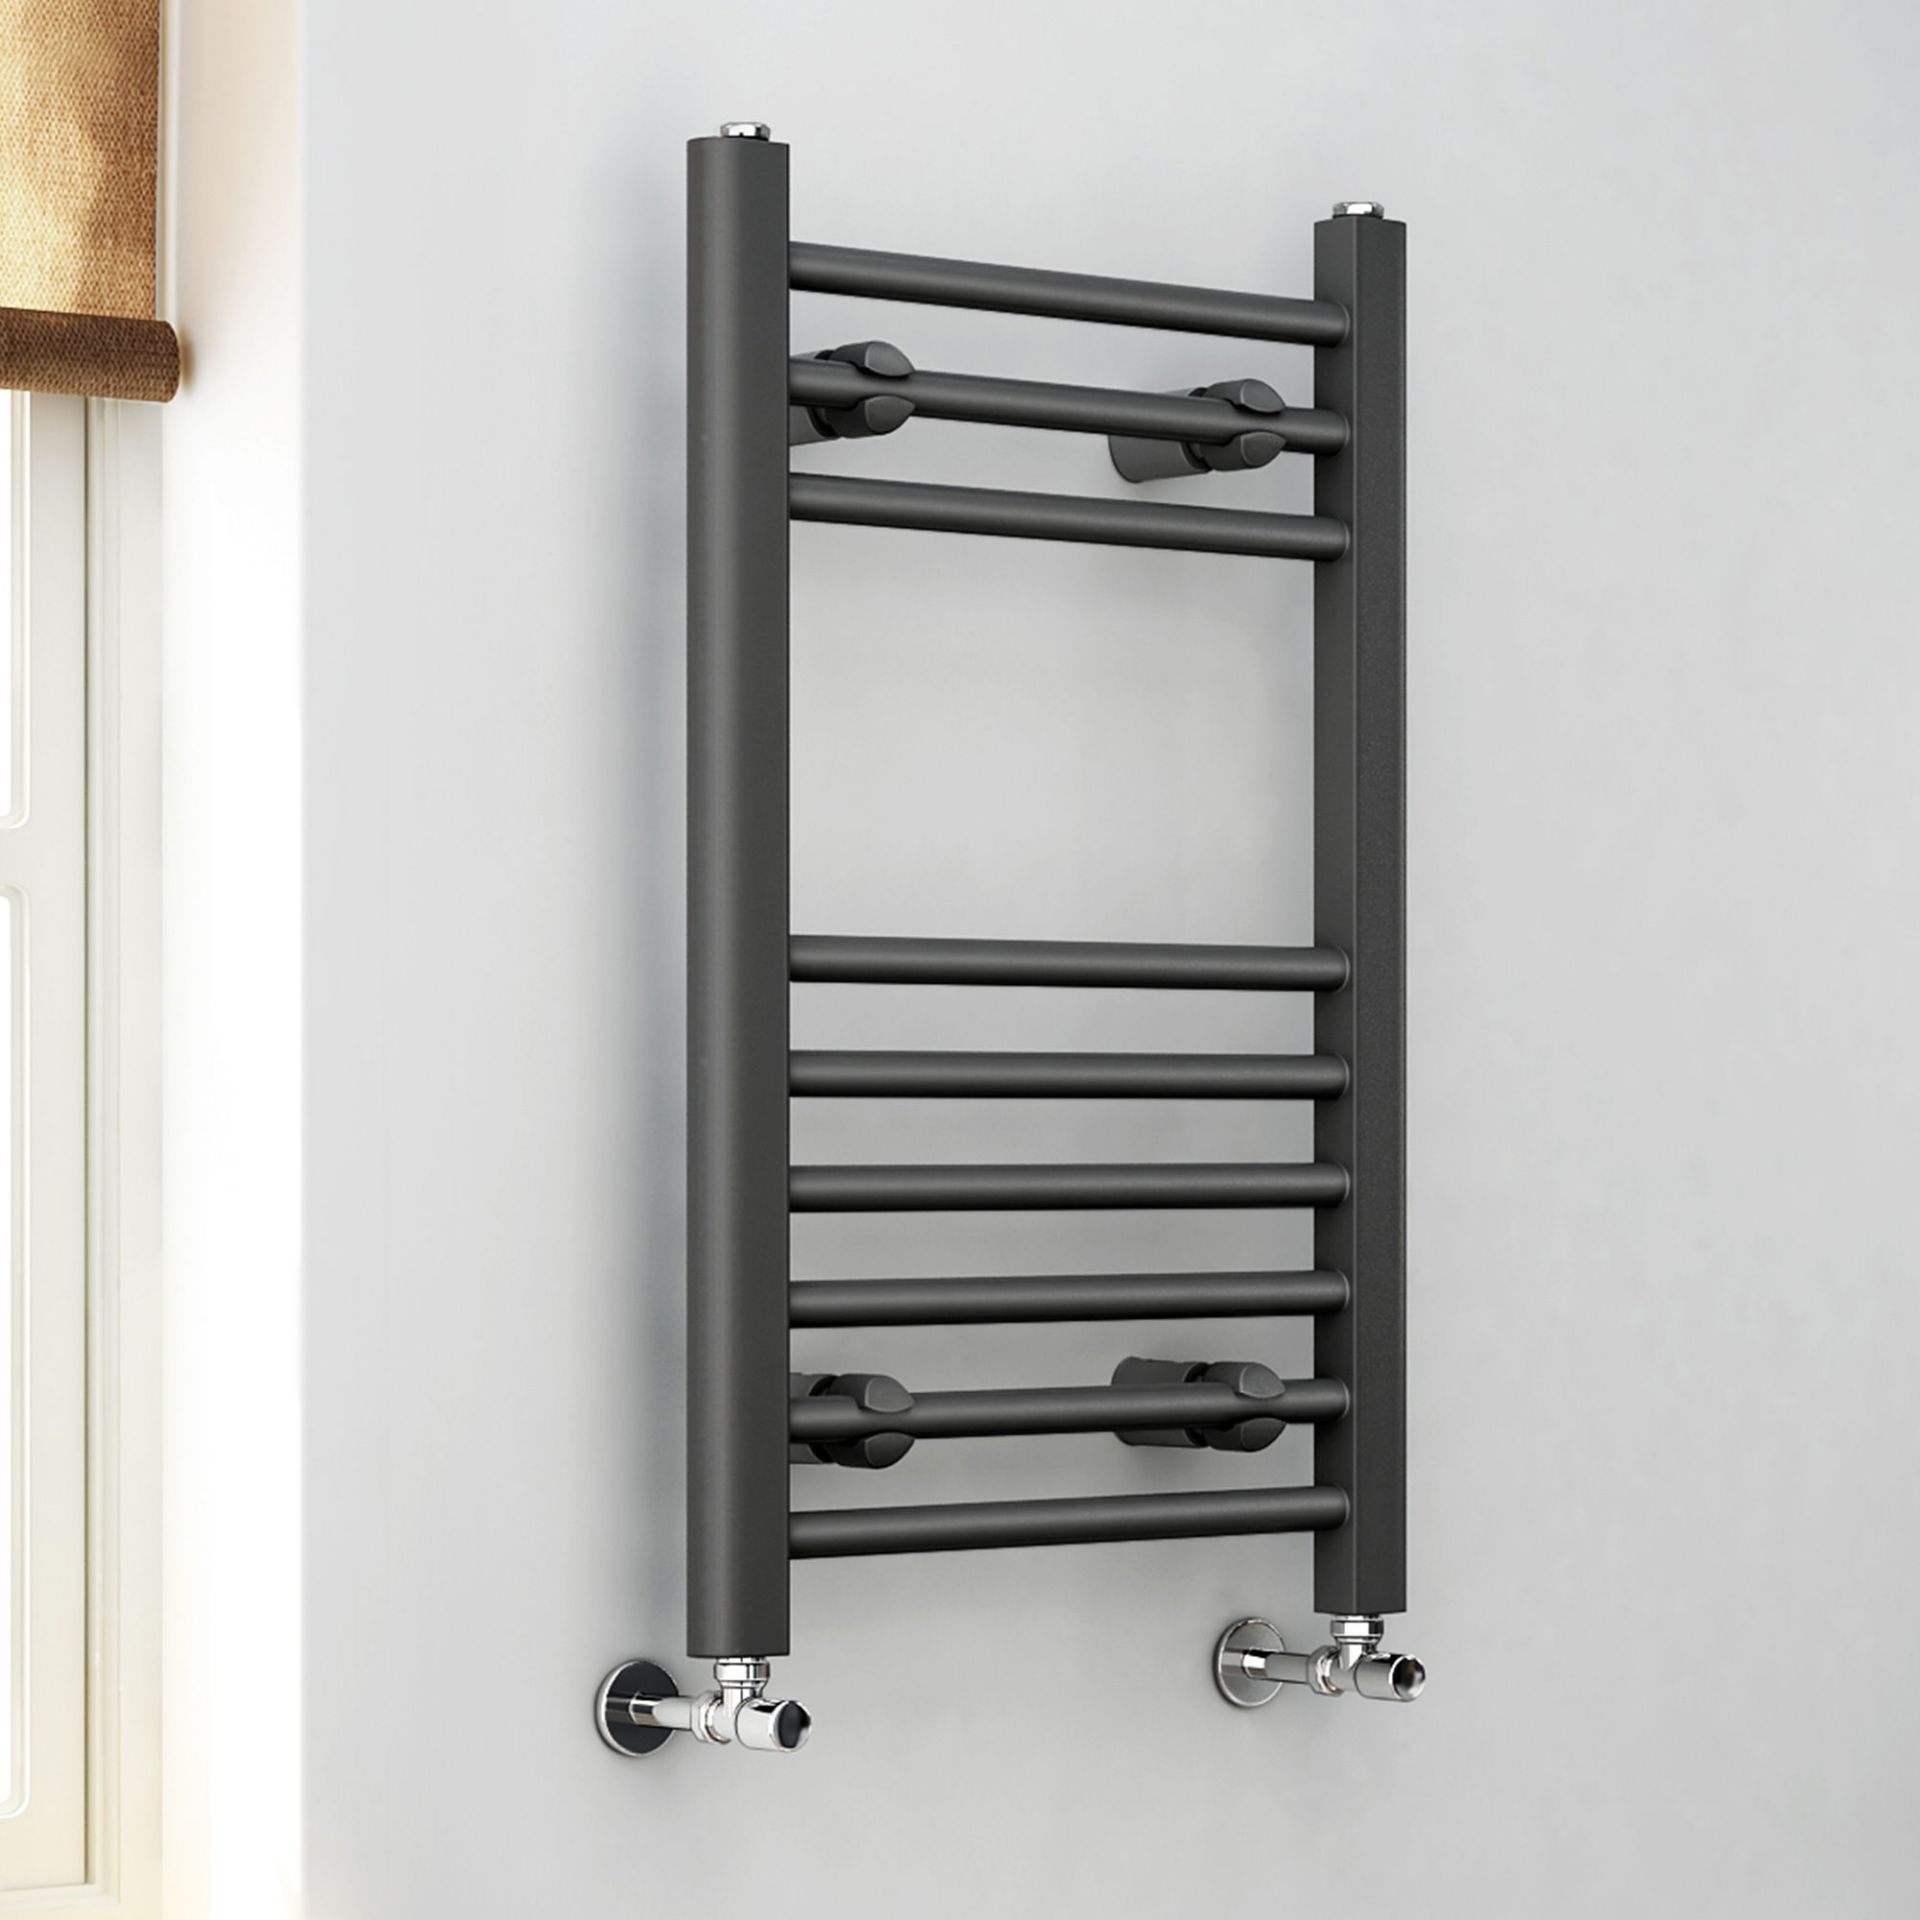 (LP141) 650x400mm Straight Heated Towel Radiator. Low carbon steel chrome plated radiator This